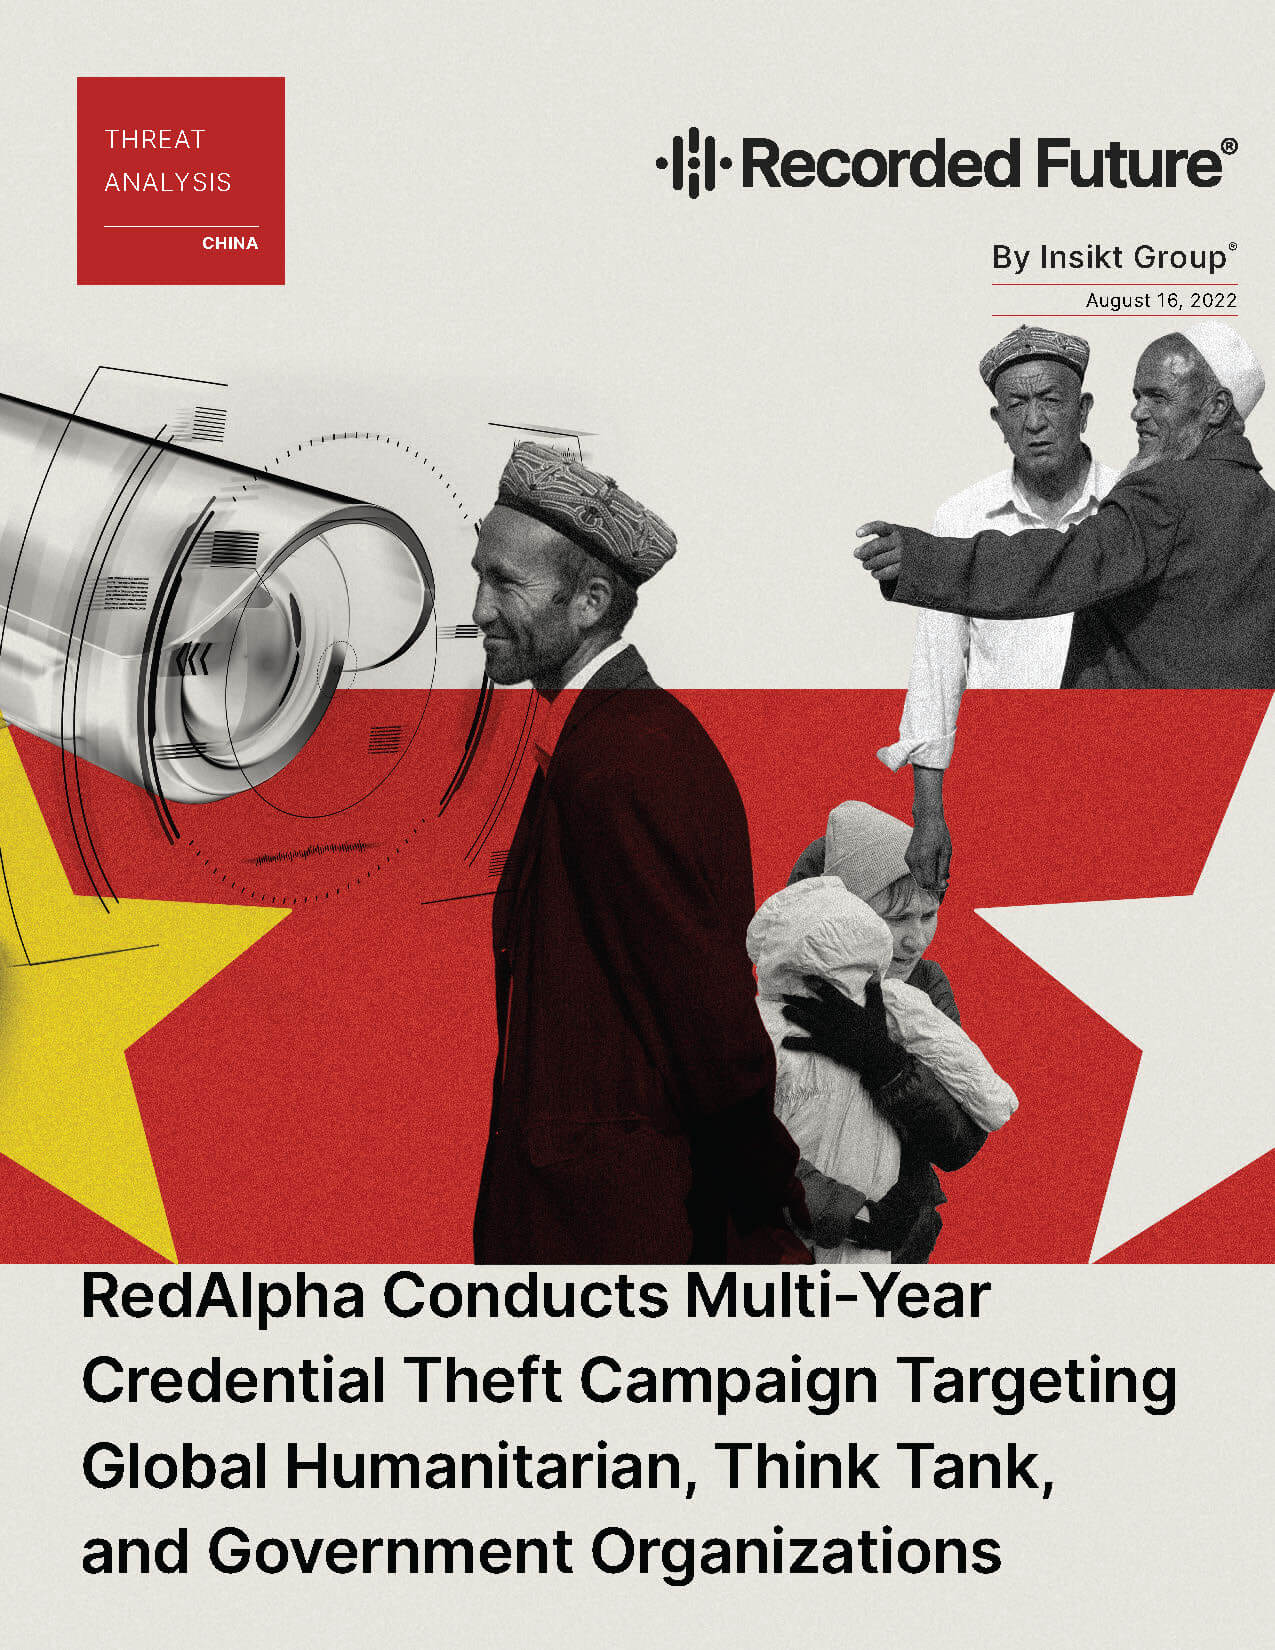 RedAlpha Conducts Multi-Year Credential Theft Campaign Targeting Global Humanitarian, Think Tank, and Government Organizations Report